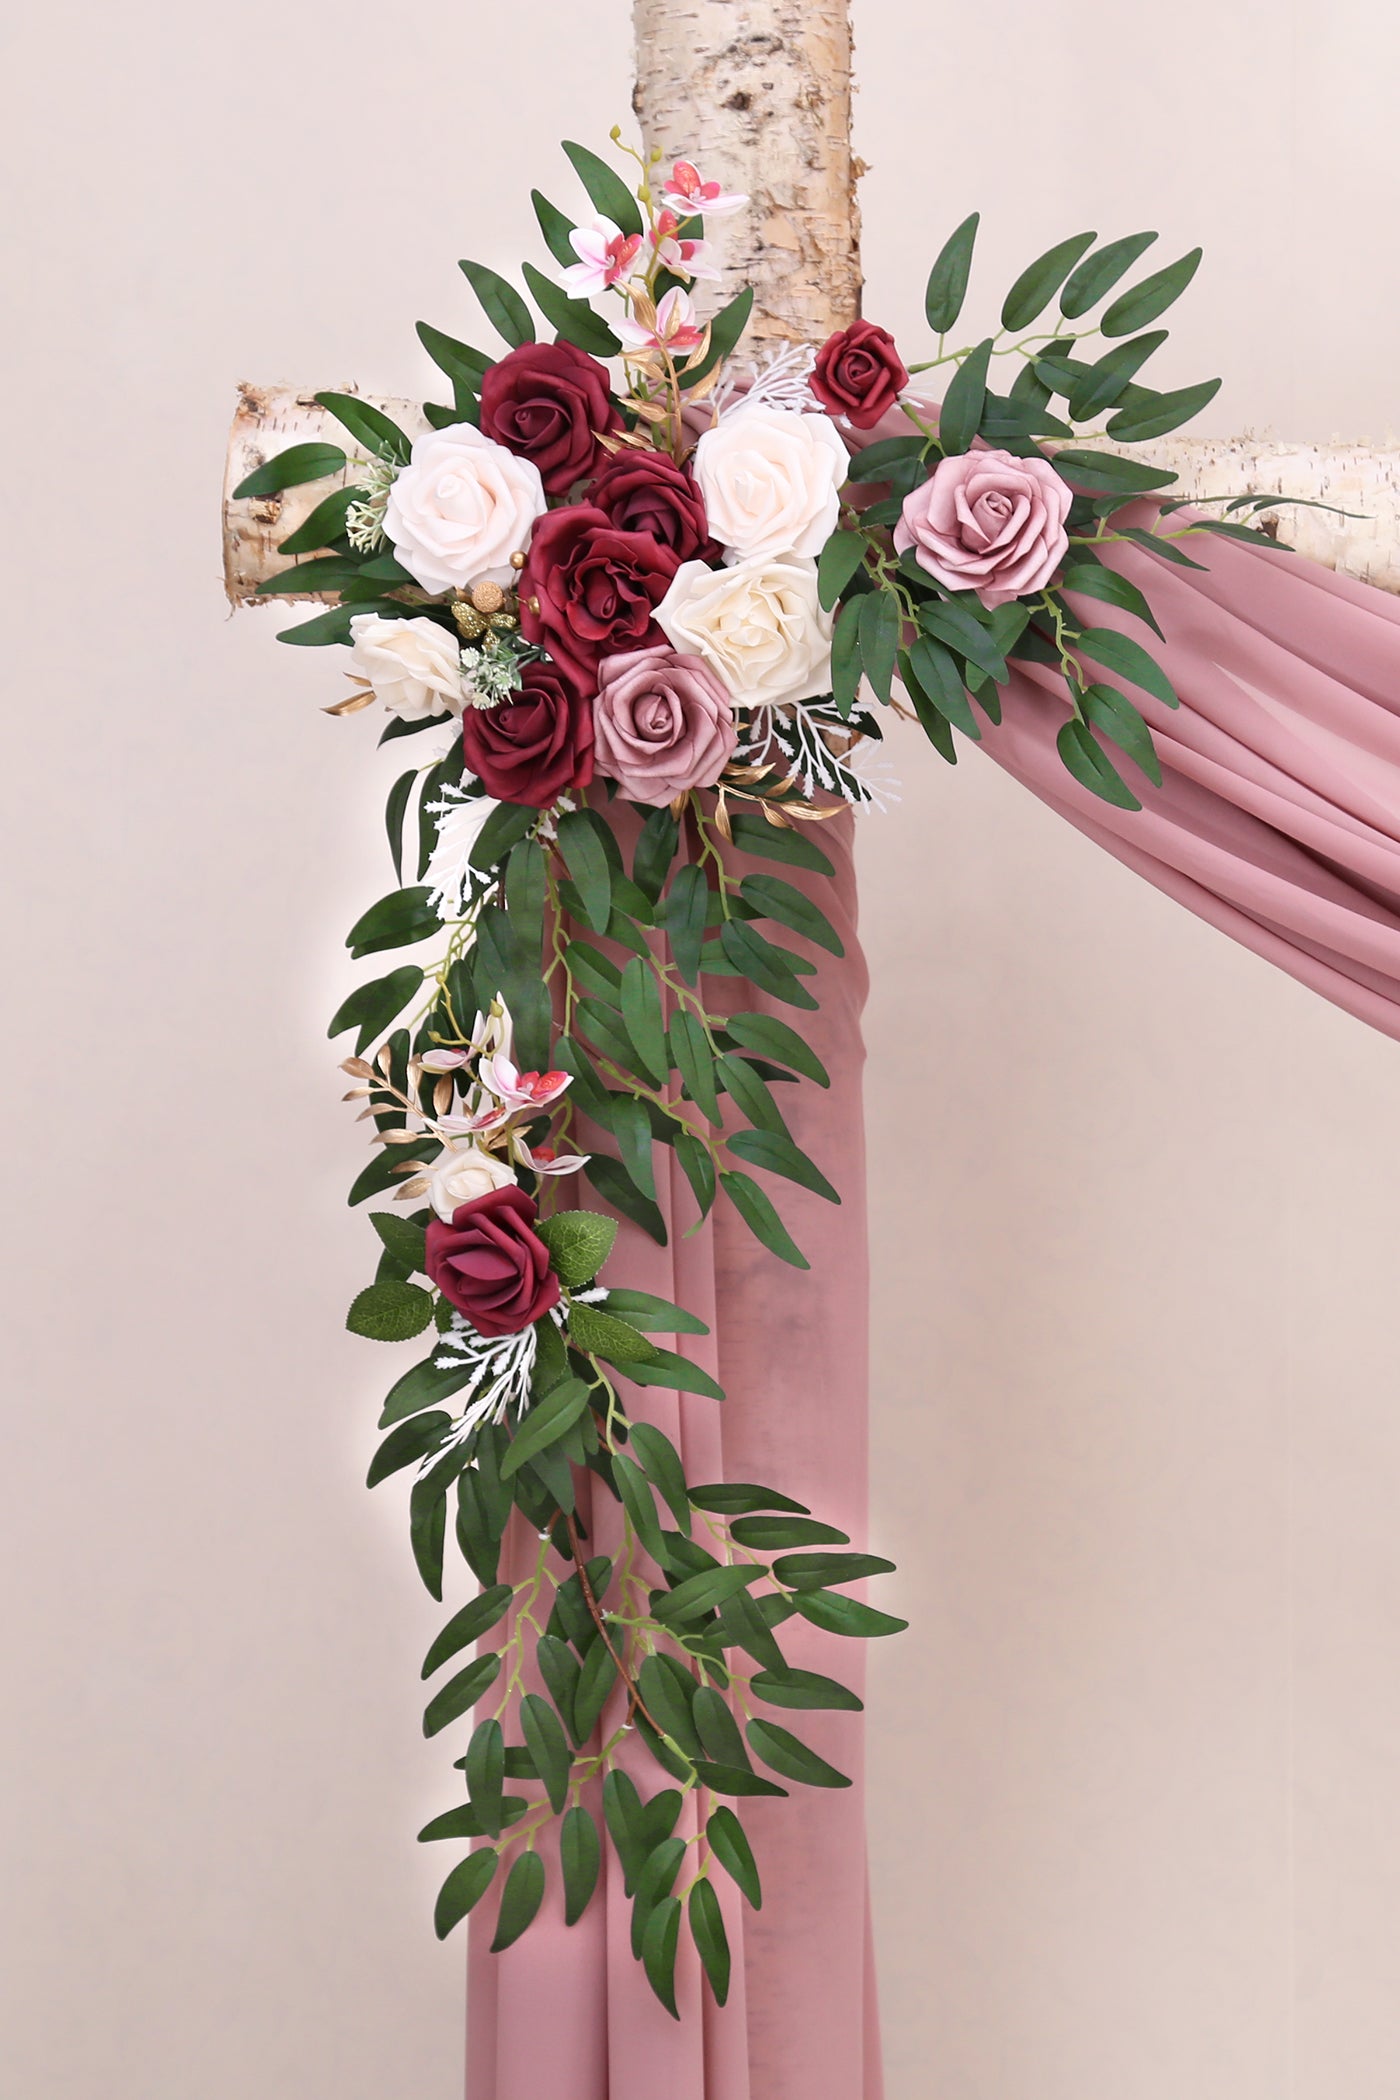 DORIS HOME Artificial Flower Swag Burgundy and Pink for Wedding Ceremony Sign Floral Decoration - Pack of 2